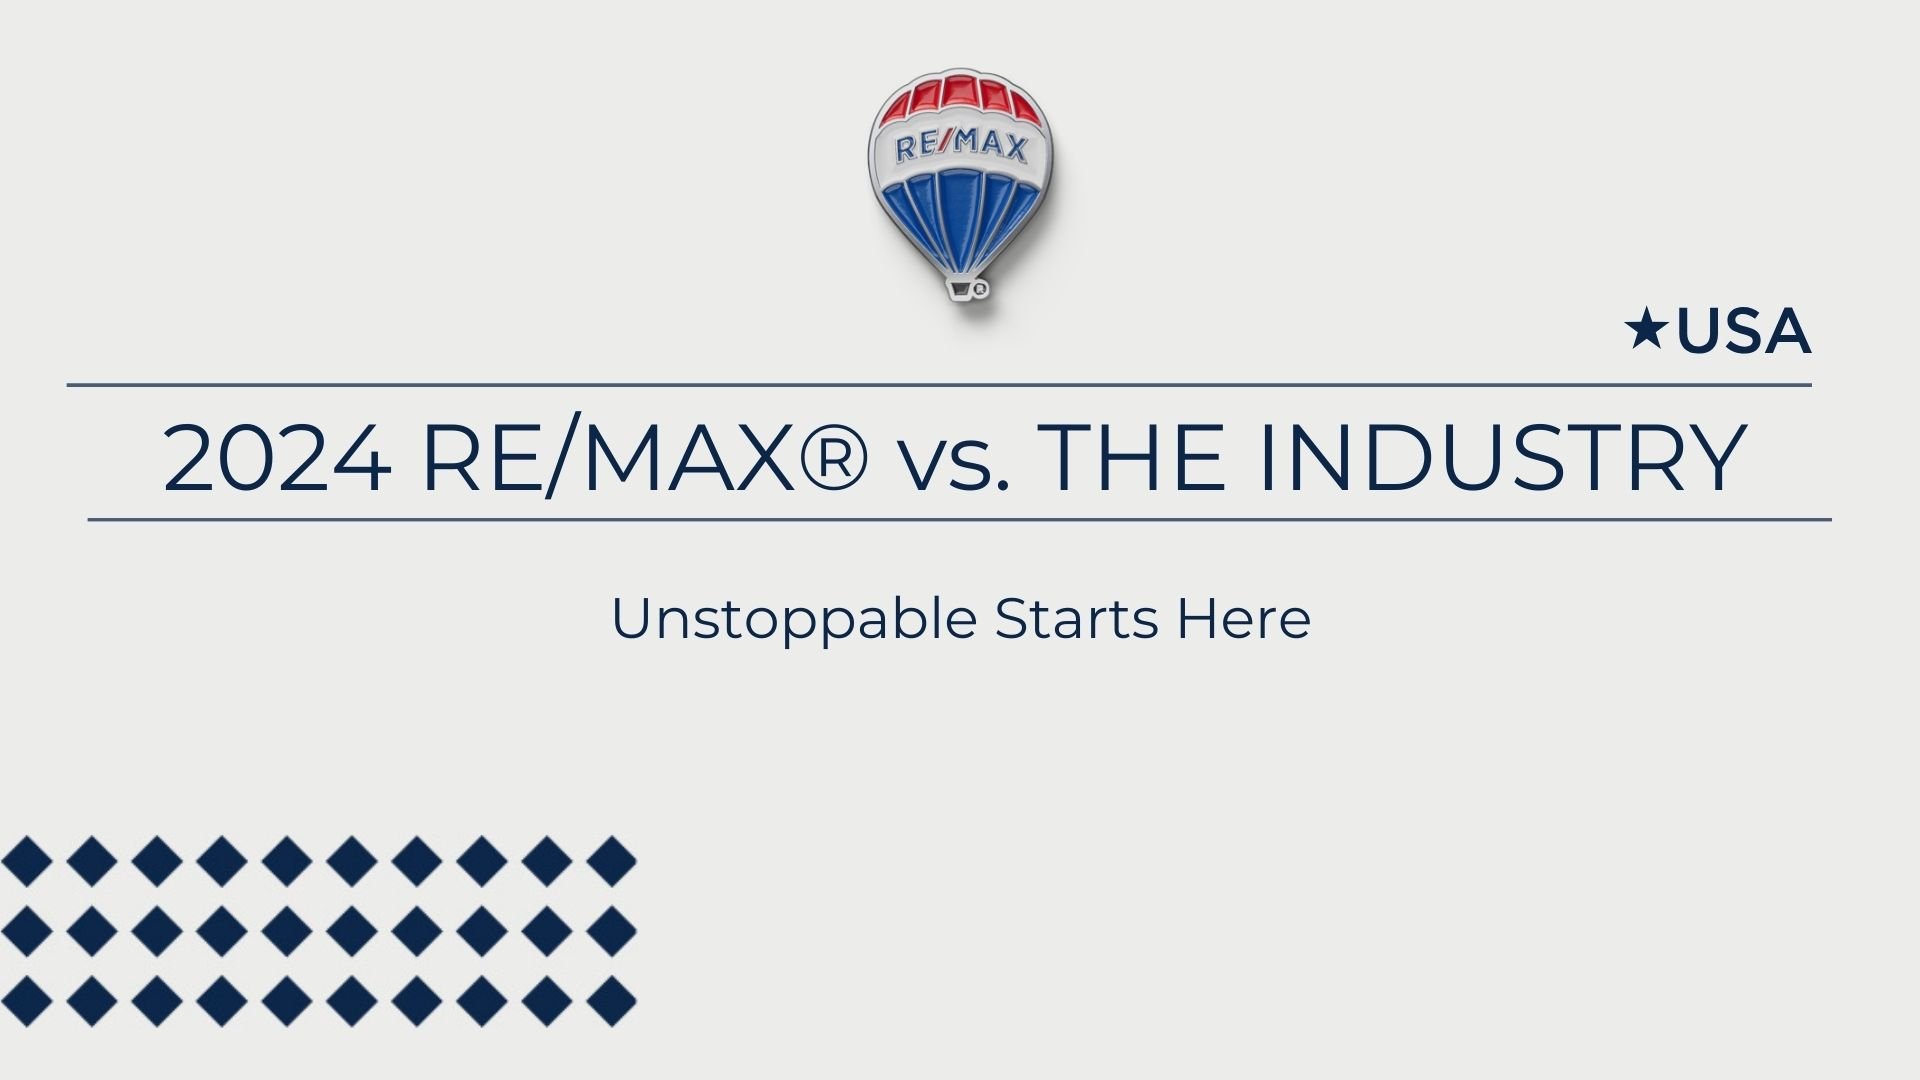 RE/MAX vs The Industry